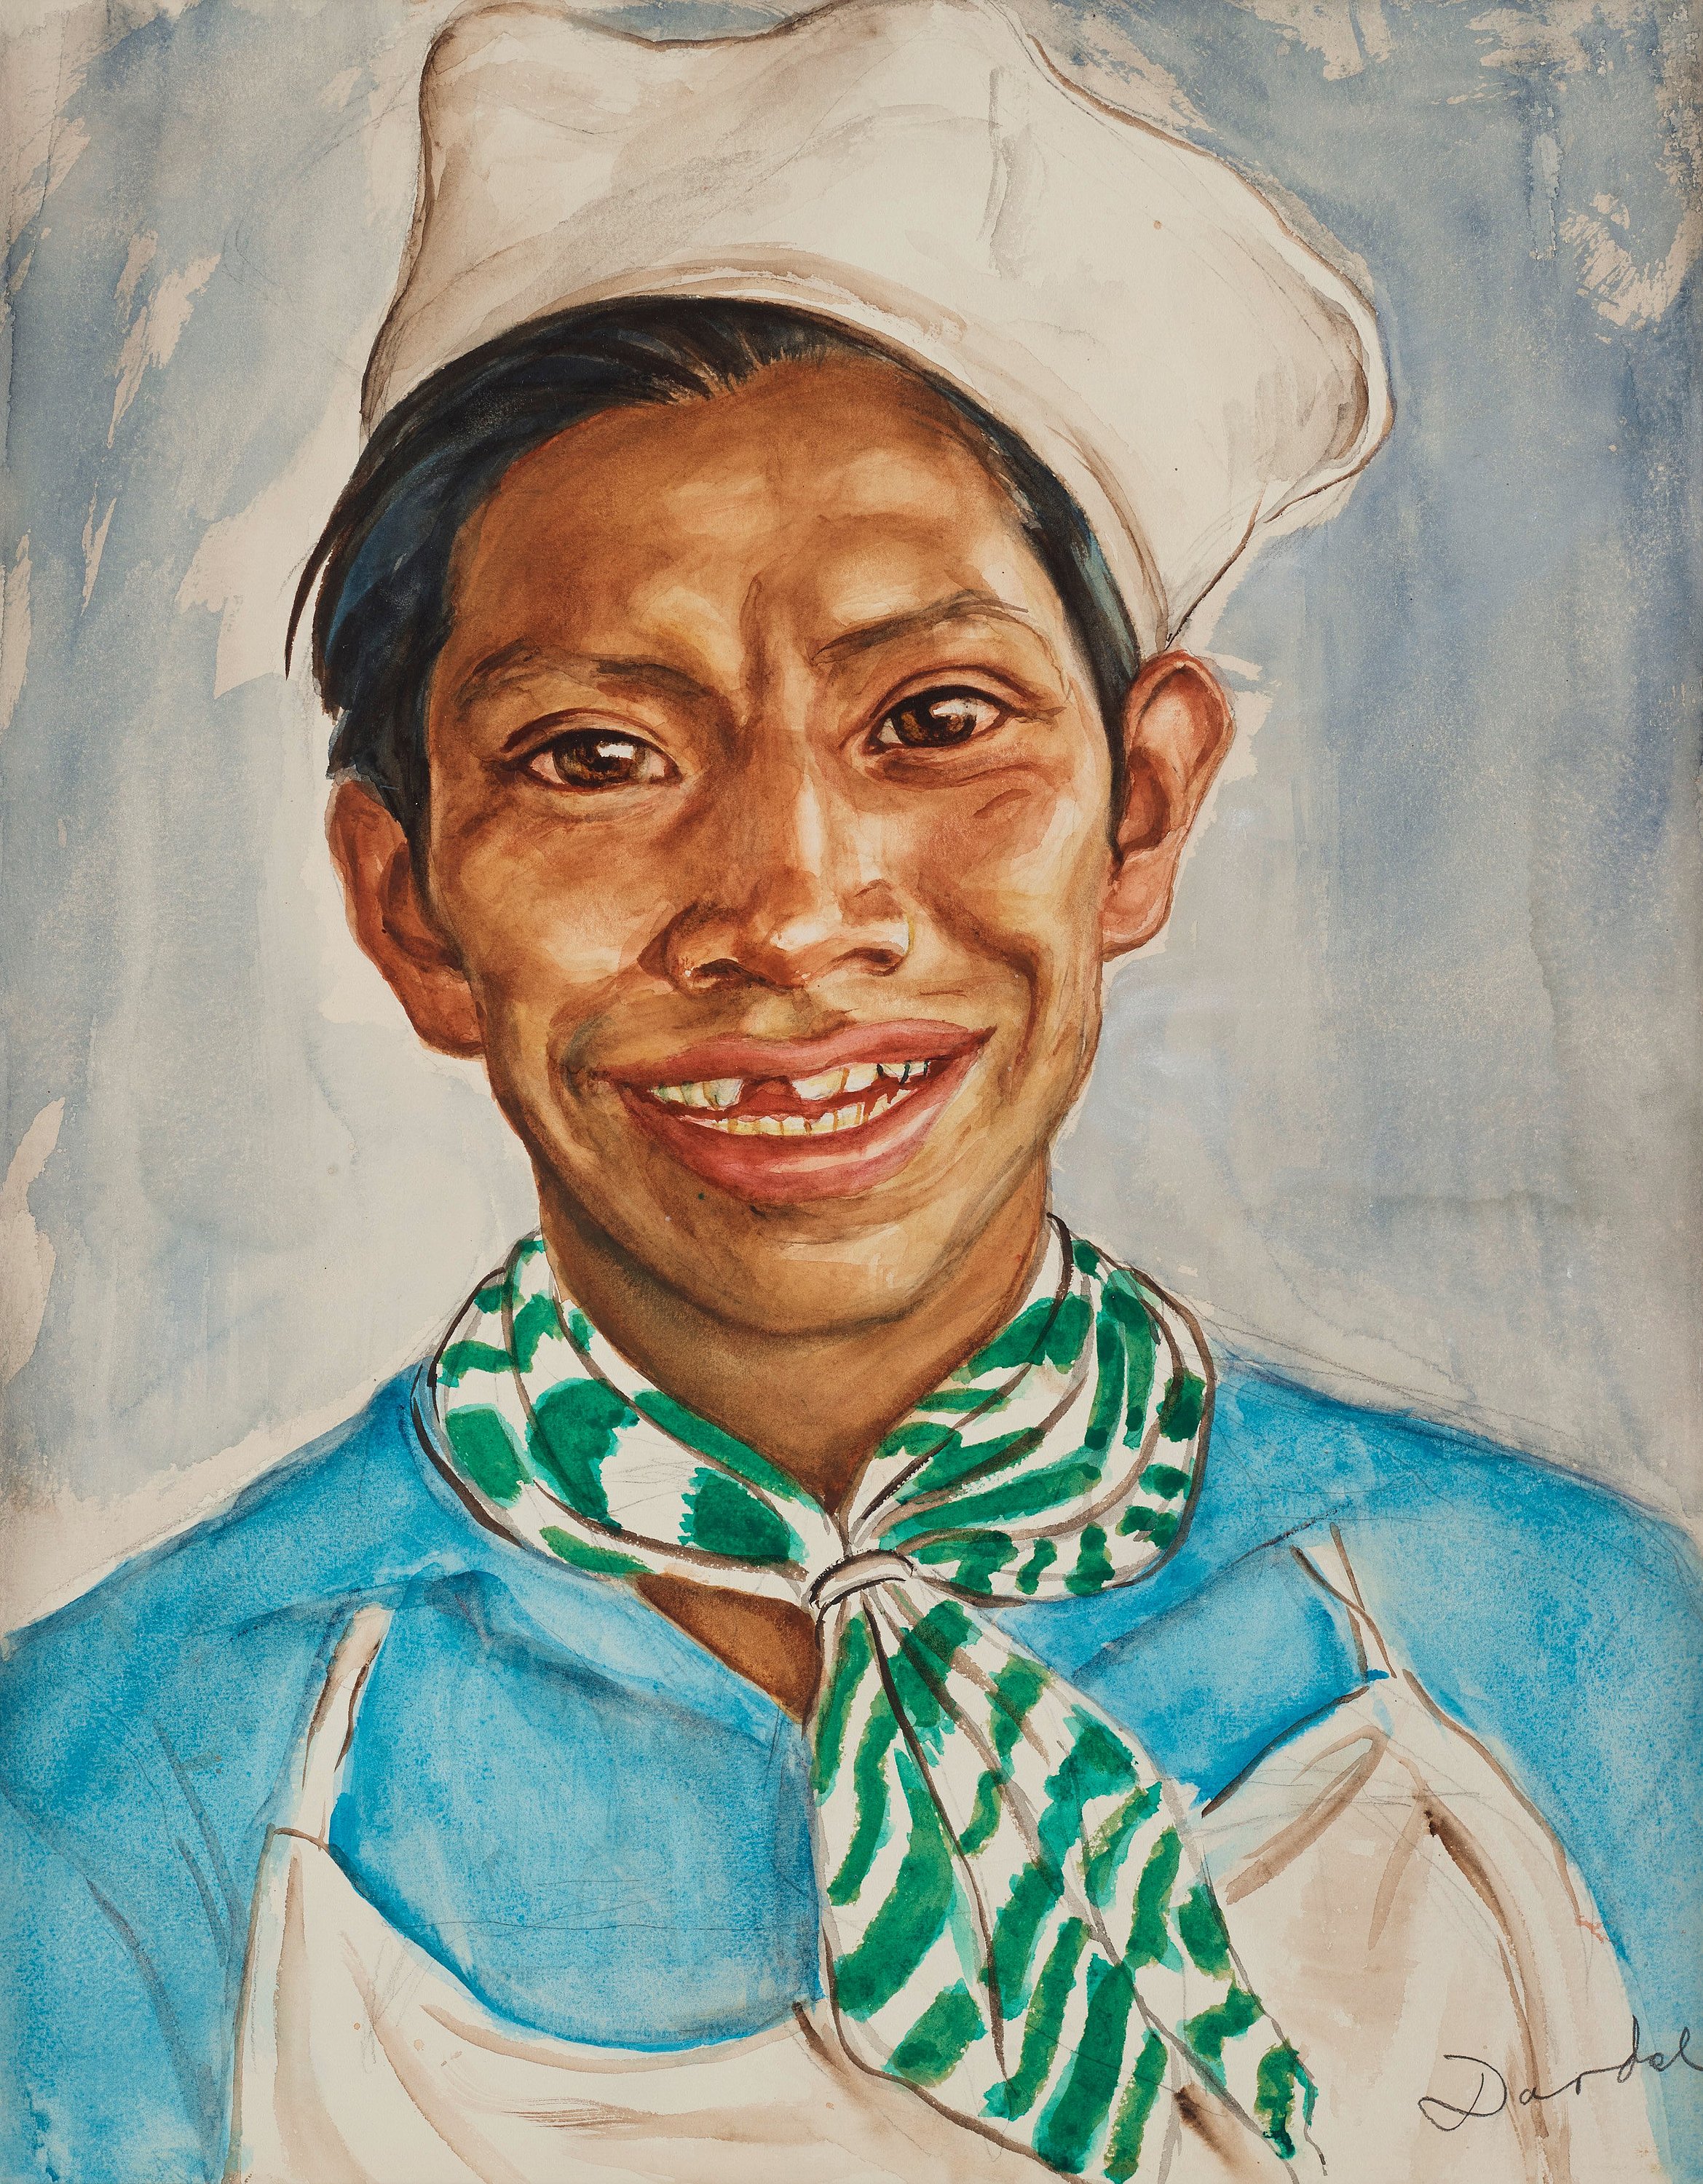 Mexican Indian Chef by Nils Dardel